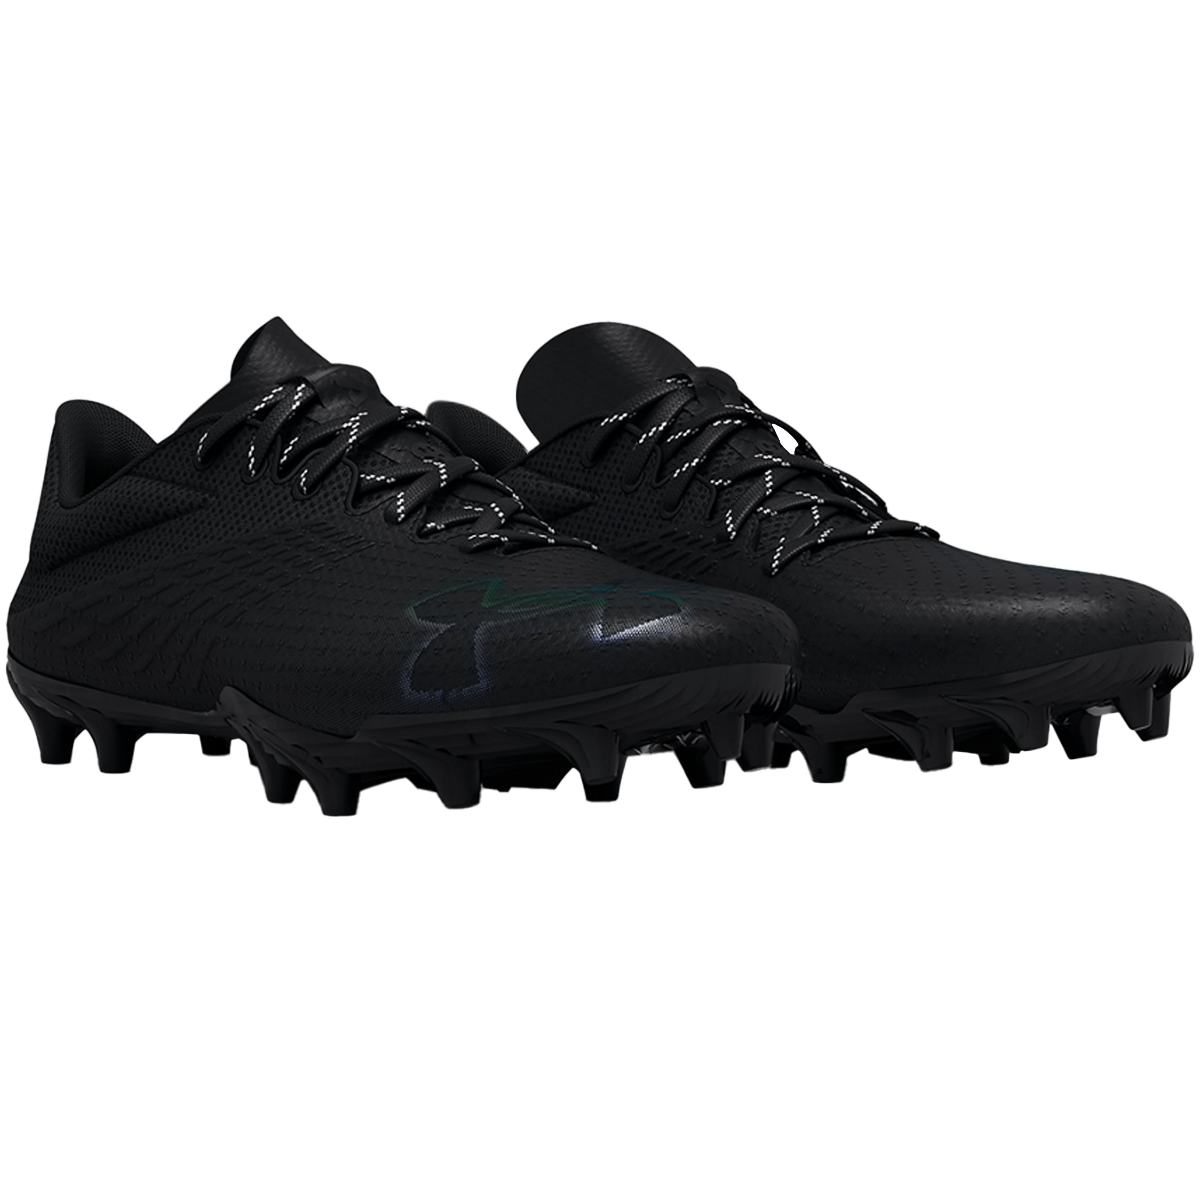 Youth Blur Select MC Football Cleats alternate view